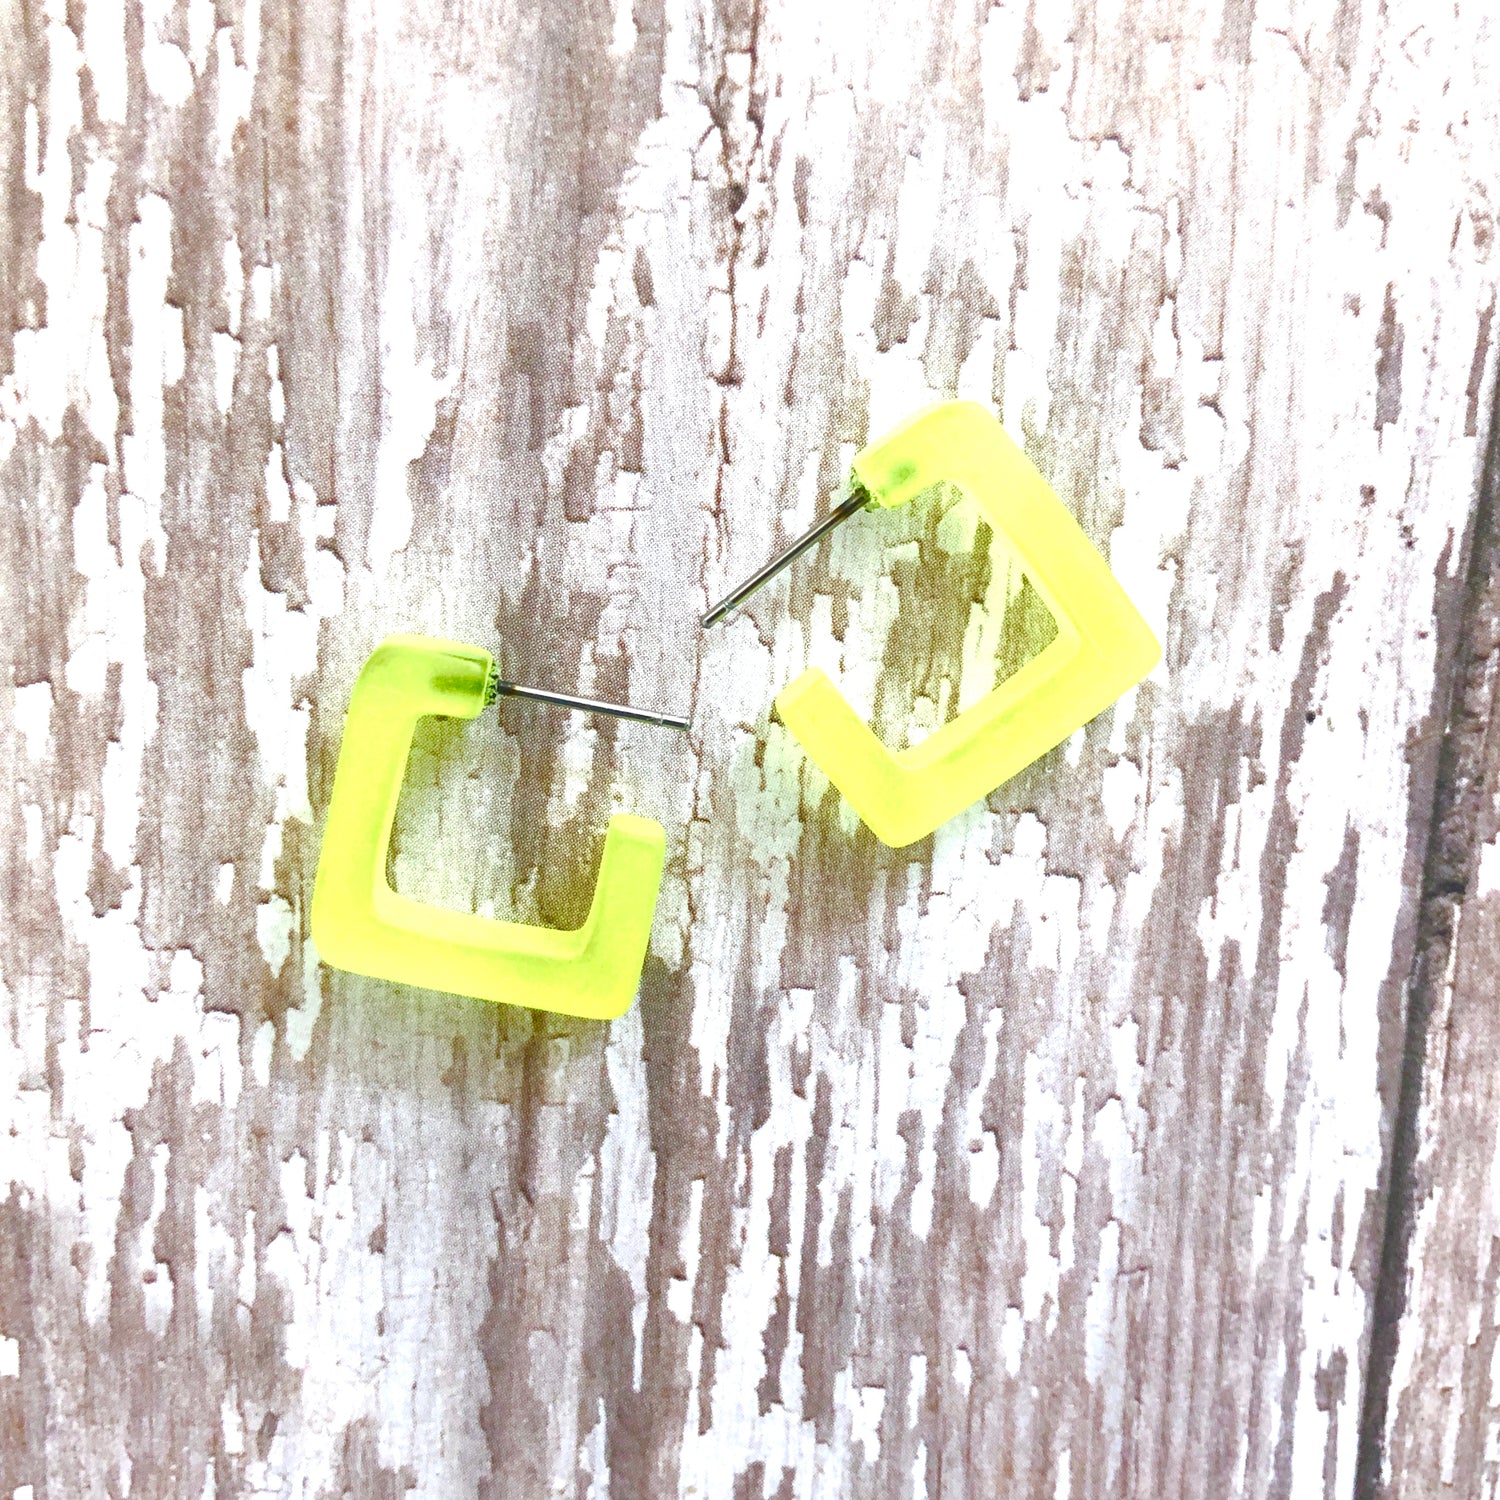 Neon Yellow Frosted Small Square Hoop Earrings